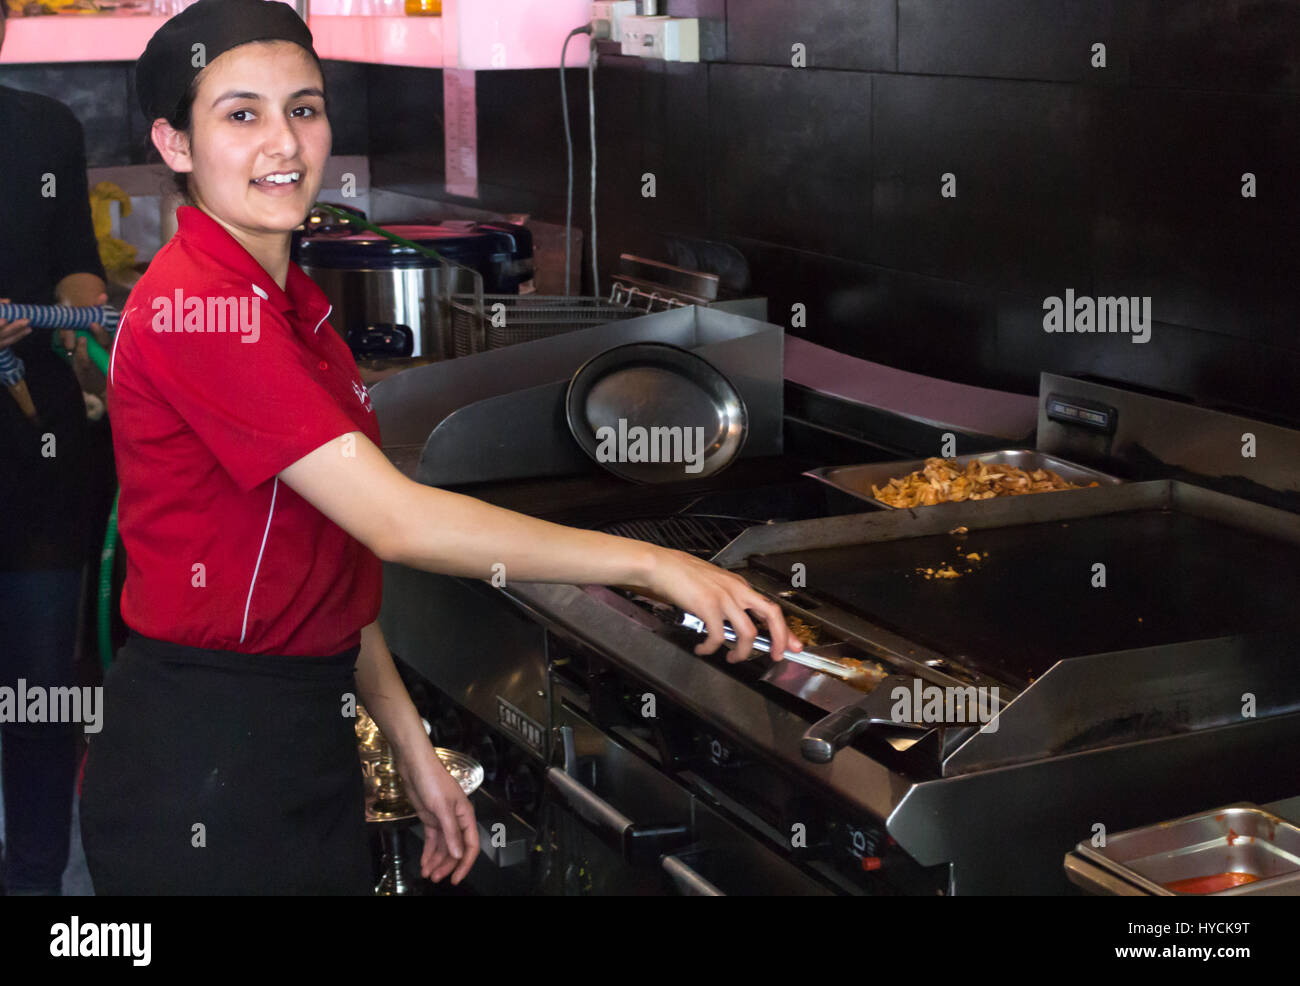 Auckland - February 17, 2017: A female cook working inside an asian restaurant in Auckand. Stock Photo